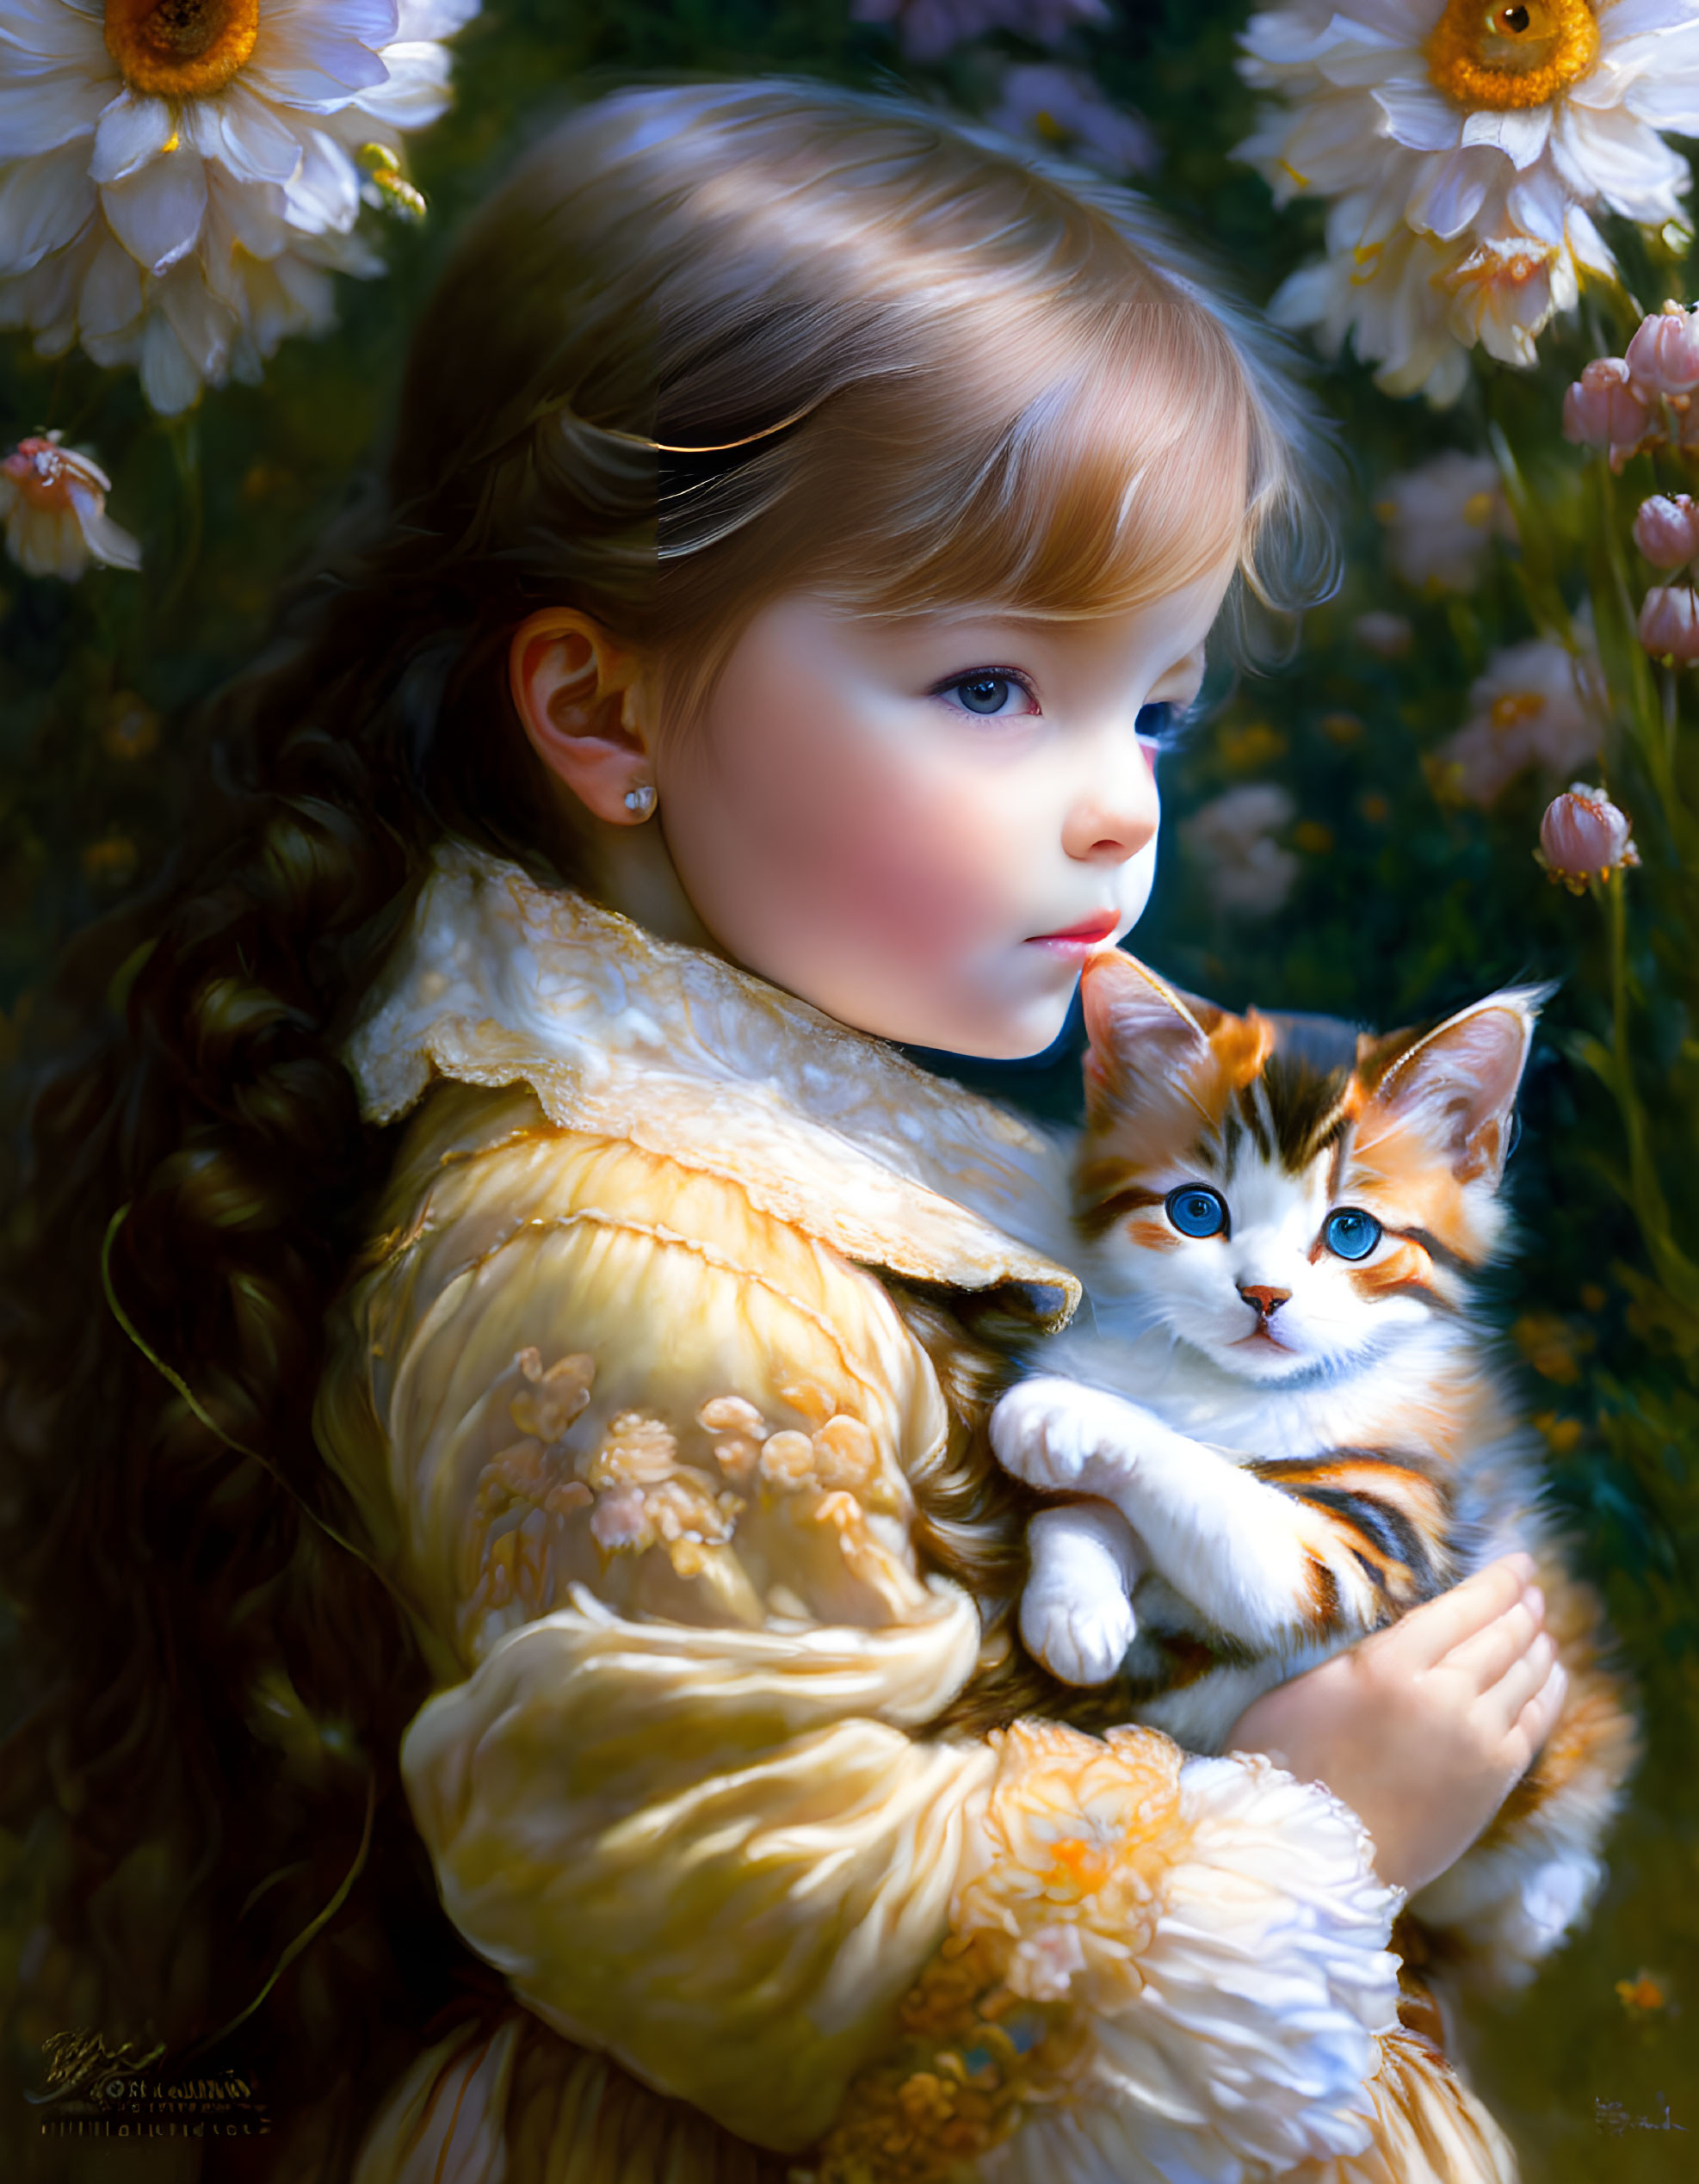 Young girl holding orange and white kitten in yellow dress among white flowers